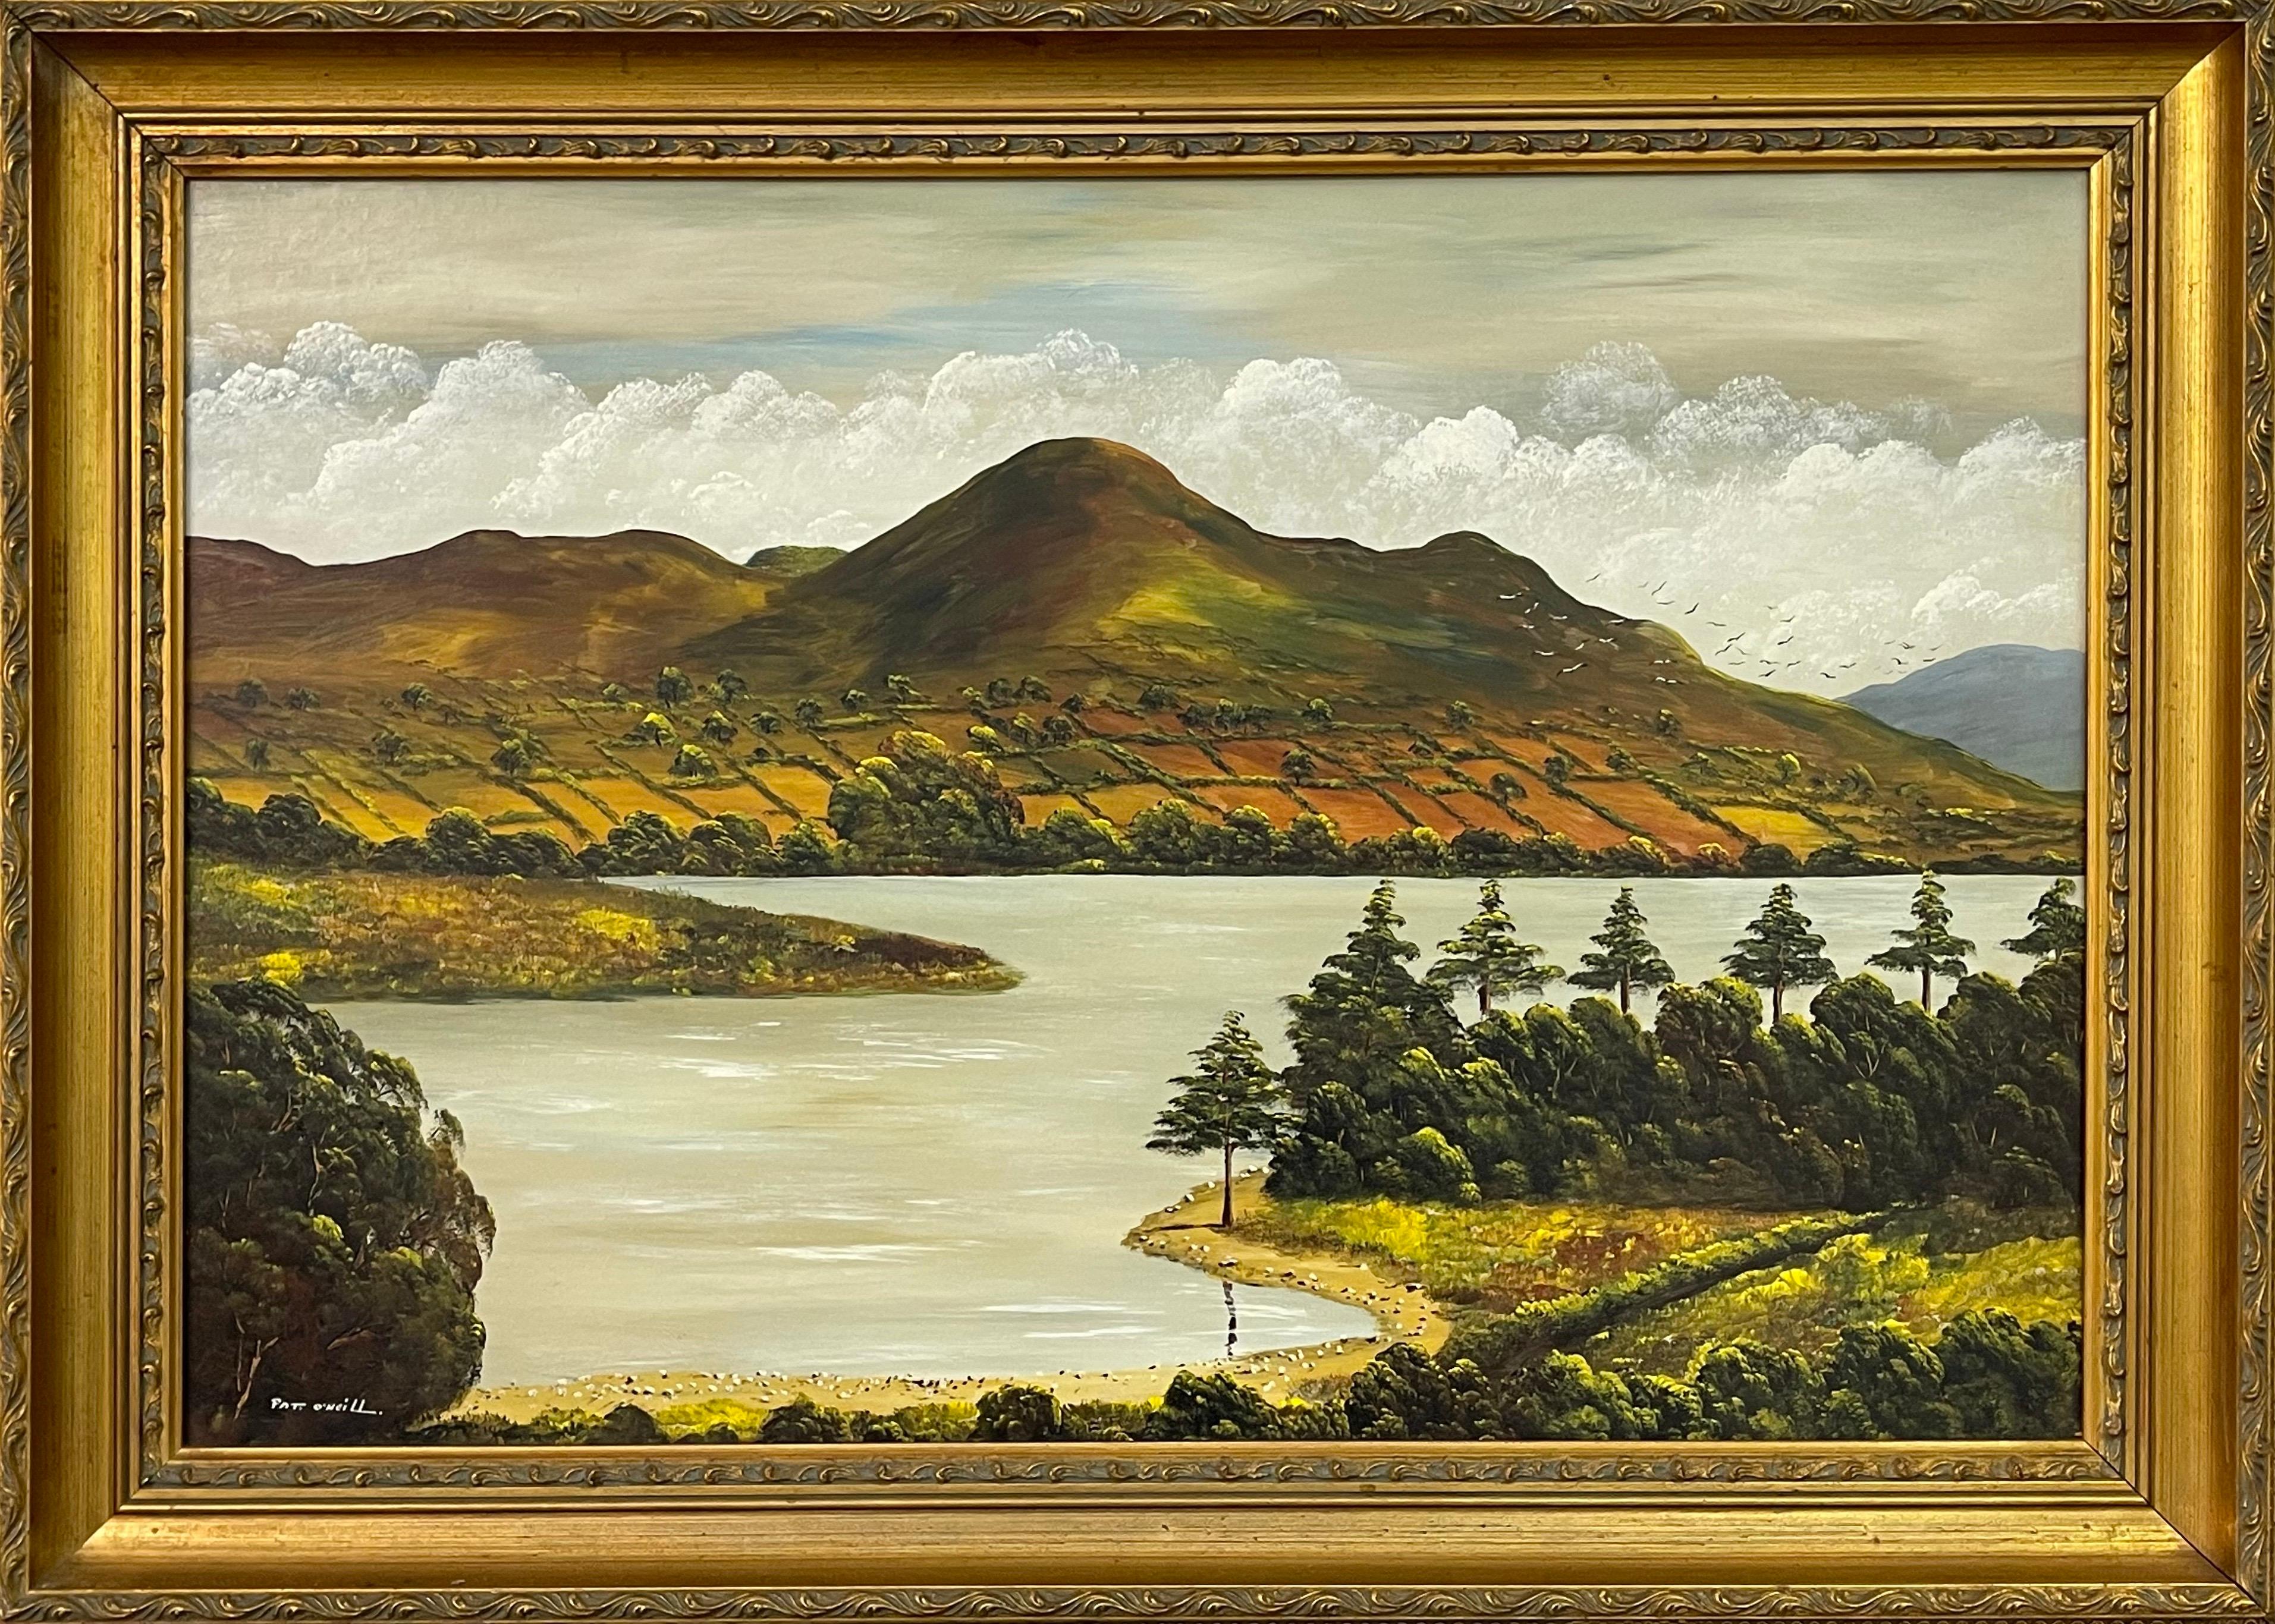 Patrick O'Neill  Figurative Painting - Oil Painting of Camlough Lake in Northern Ireland by 20th Century Modern Artist